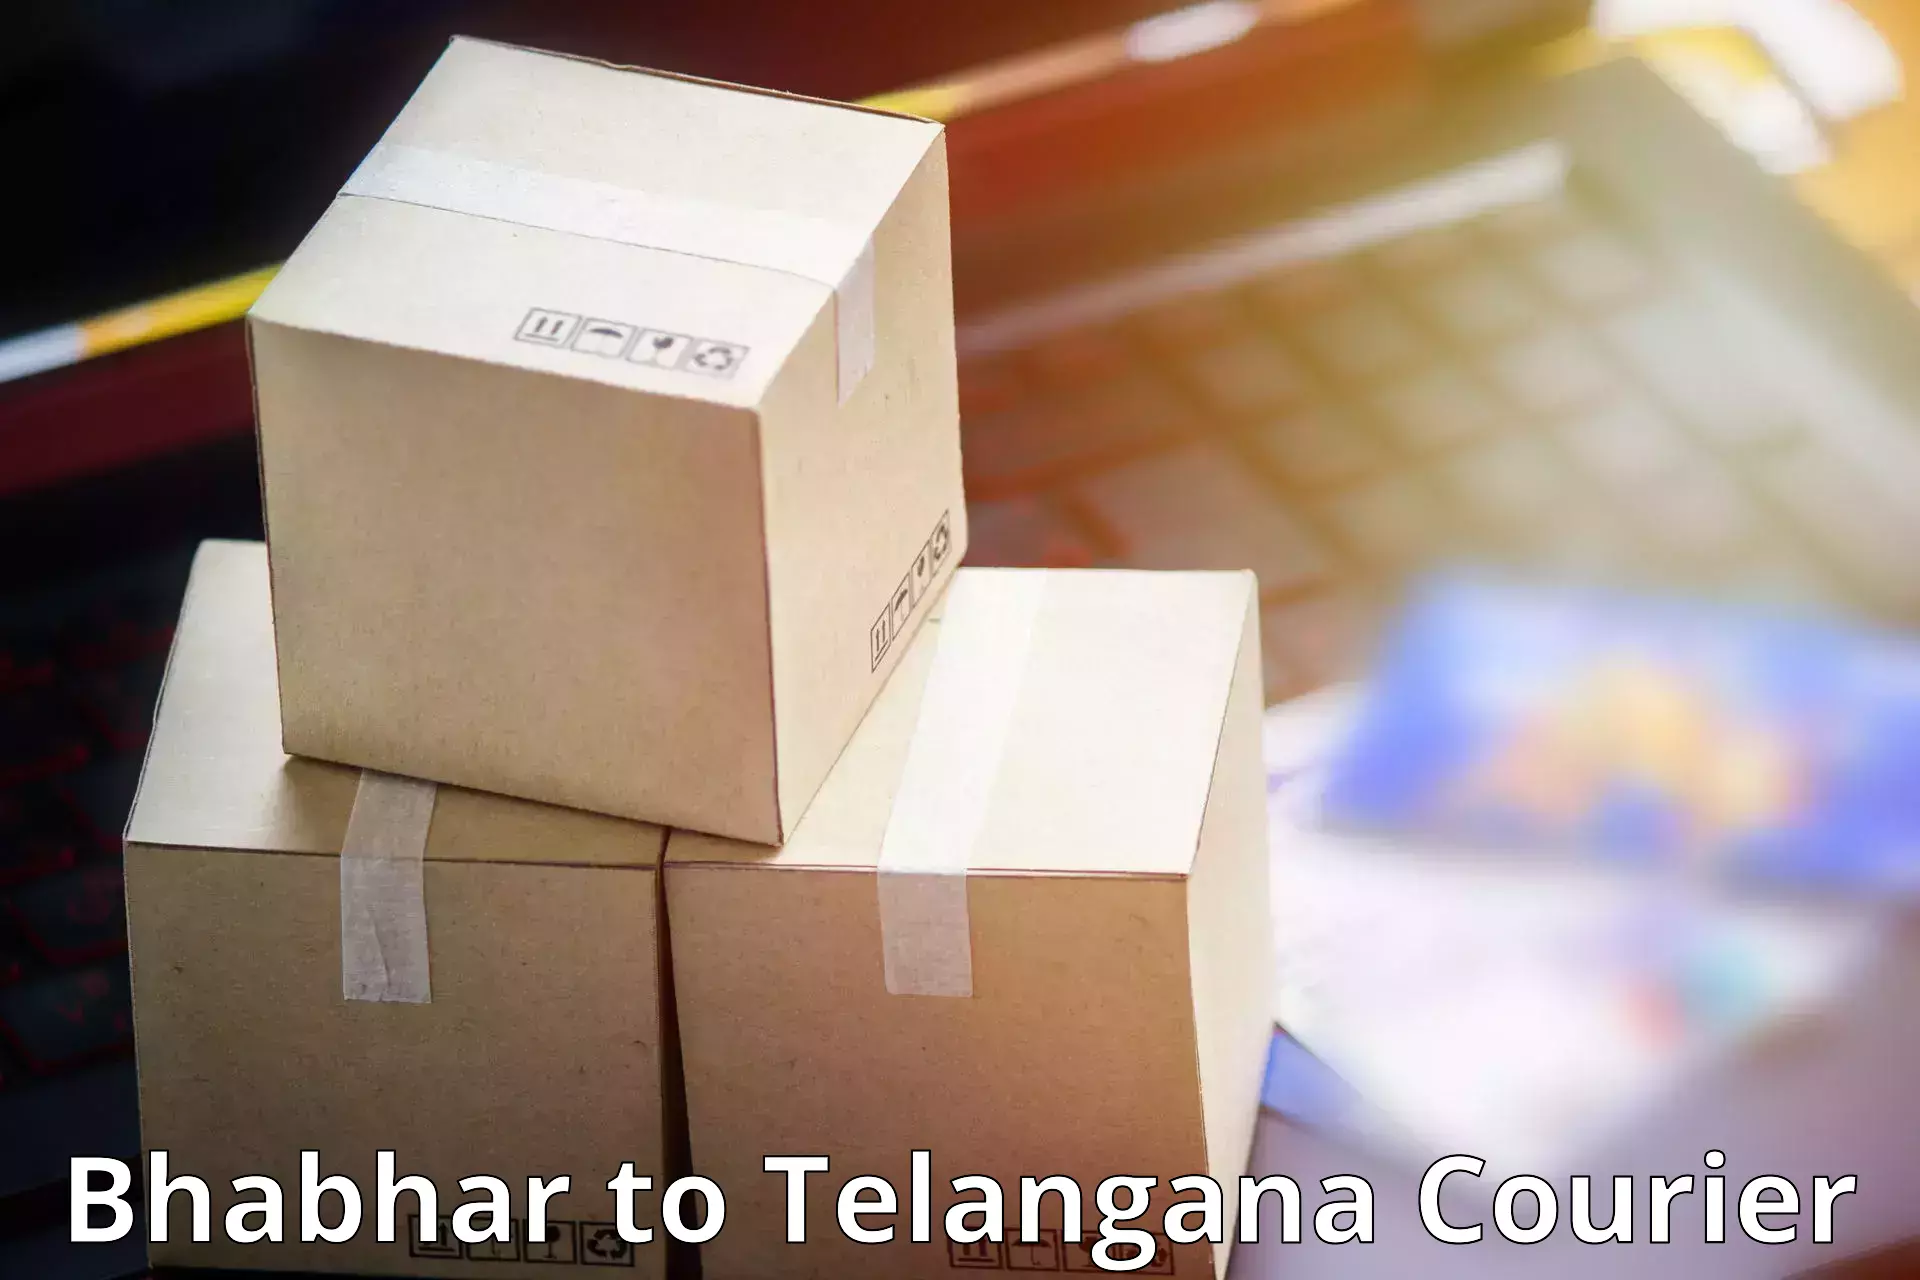 Multi-national courier services Bhabhar to Telangana